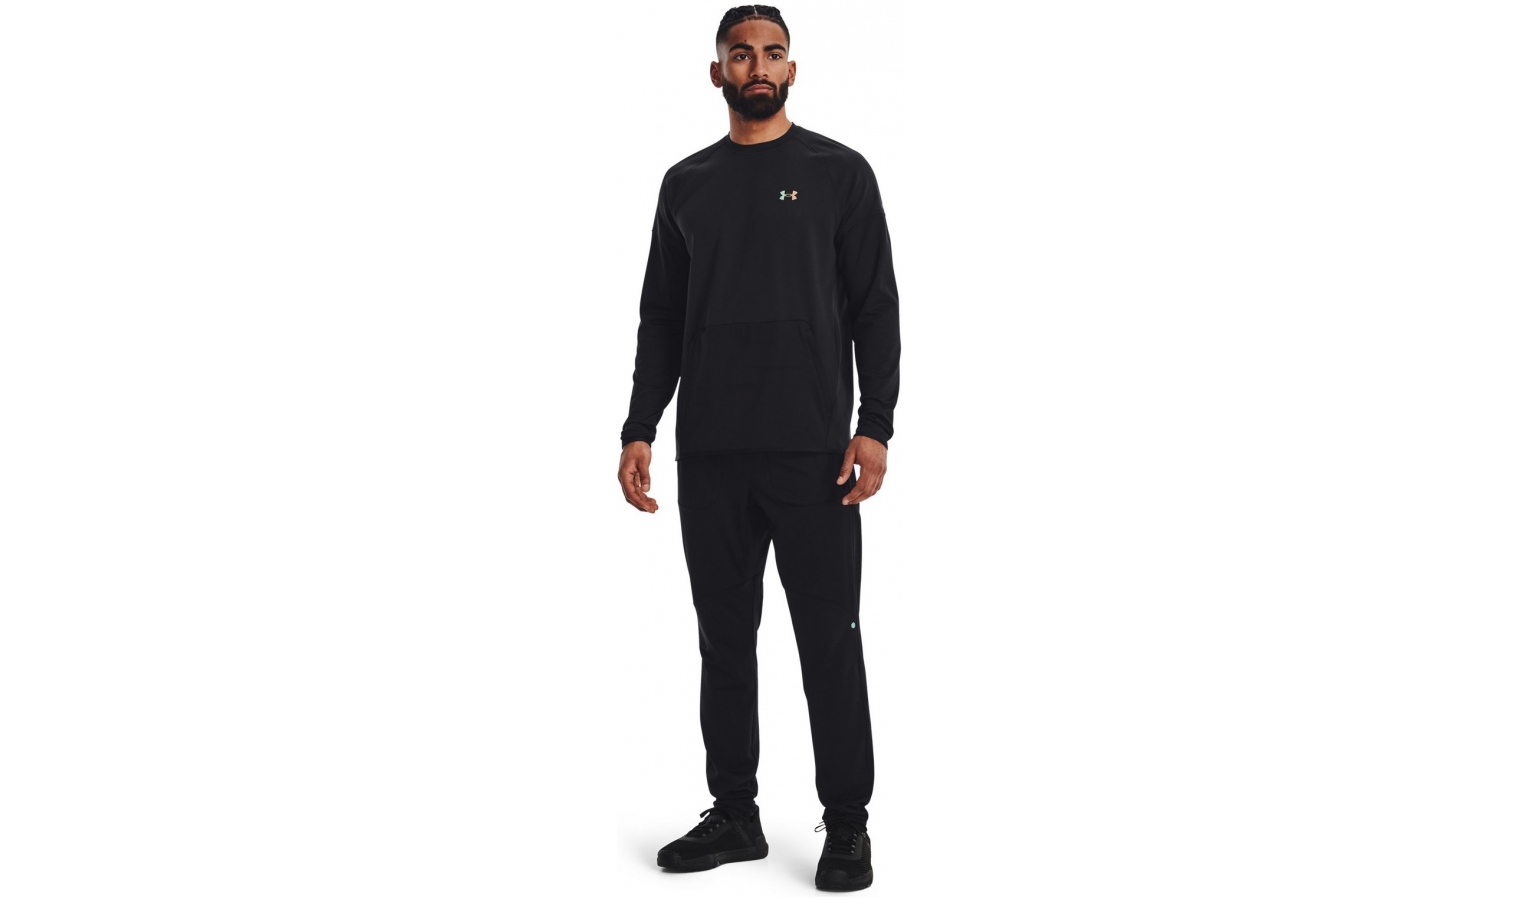 Pants and jeans Under Armour Rush All Purpose Pant Black/ Black